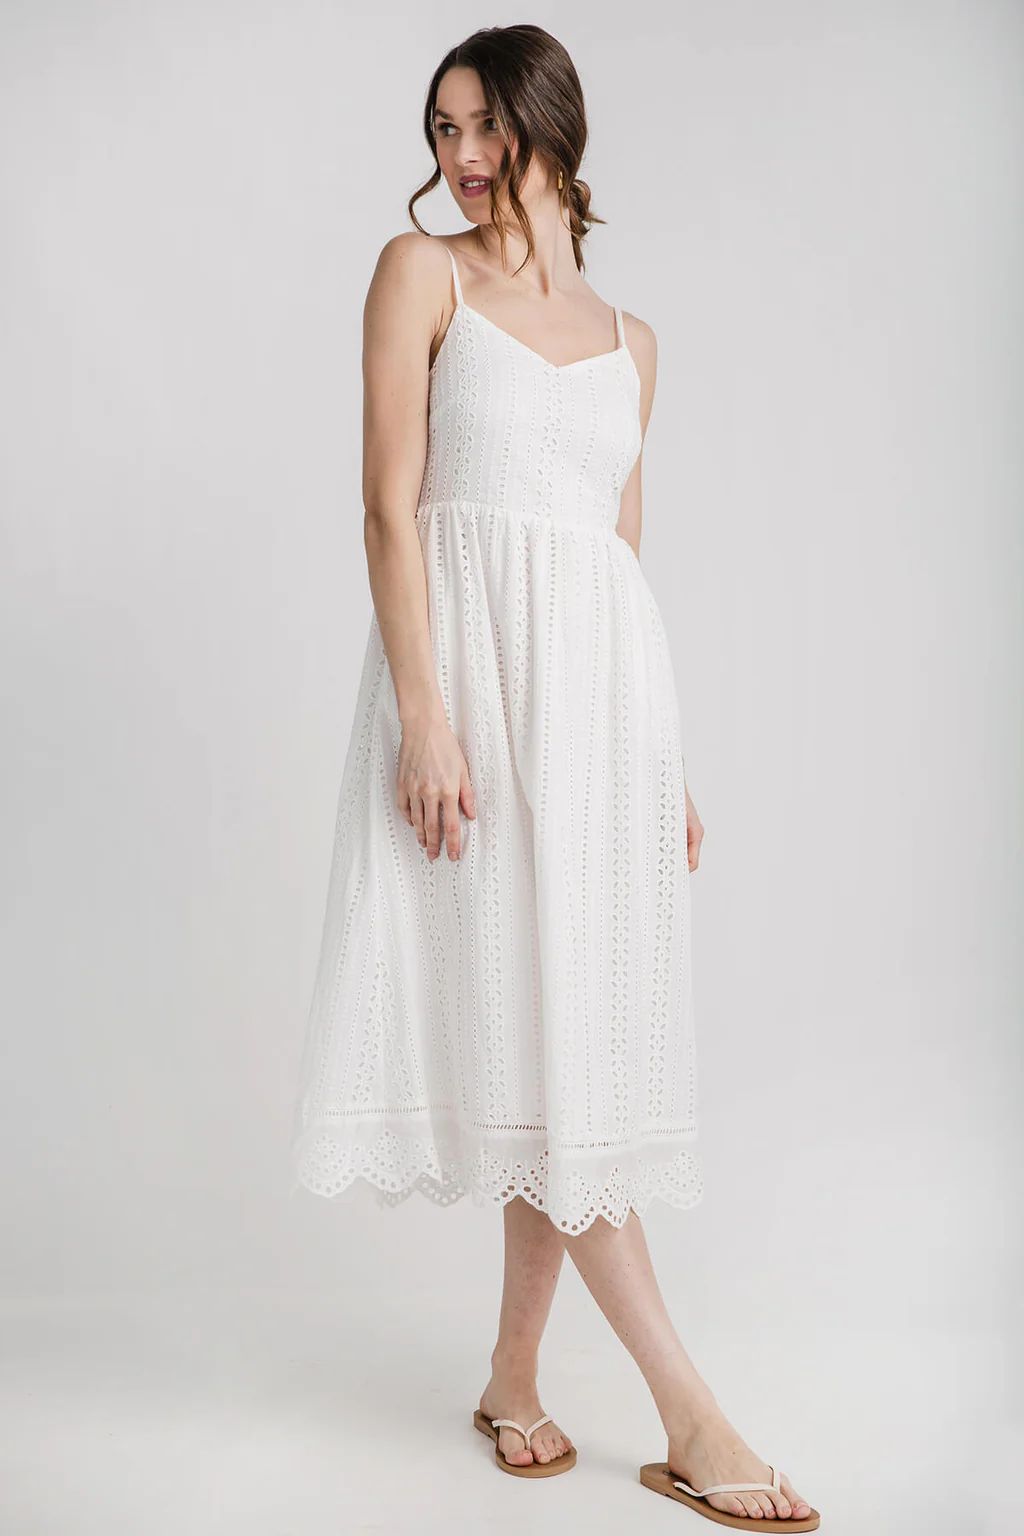 Skies Are Blue Eyelet Lace Smocked Back Dress | Social Threads